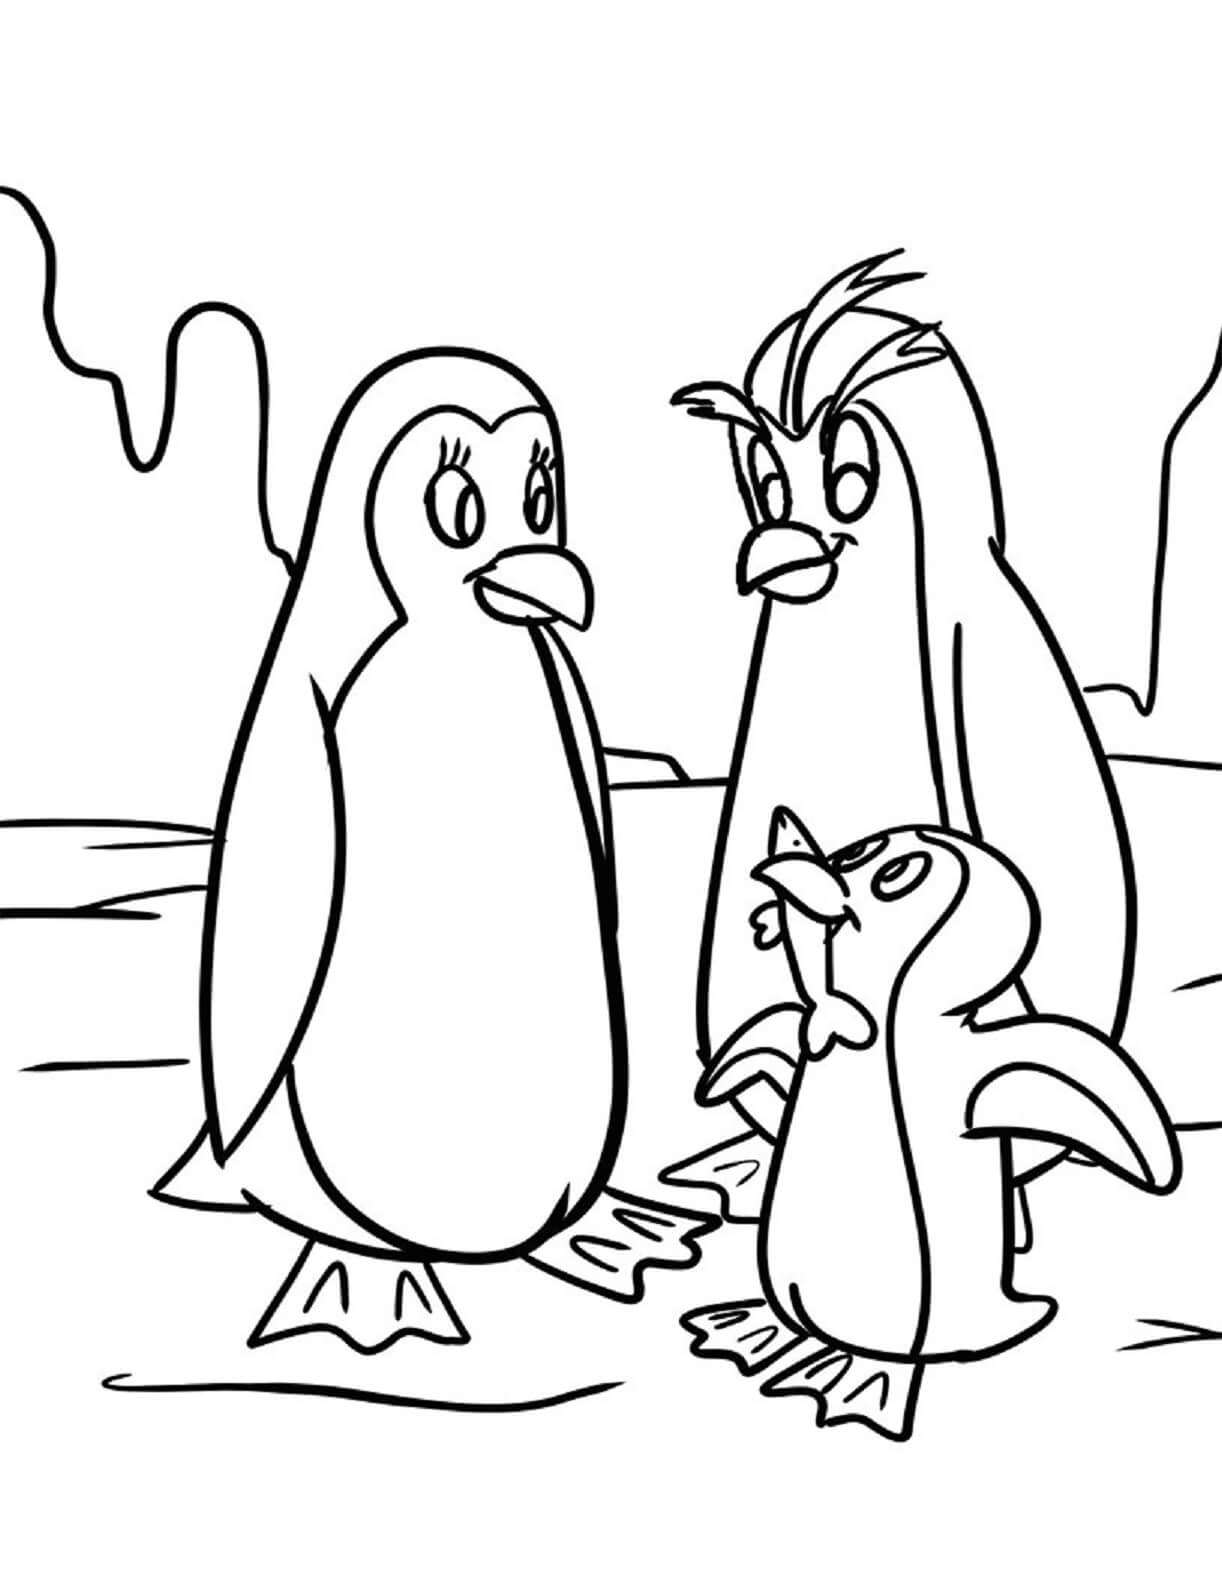 Family penguin coloring page